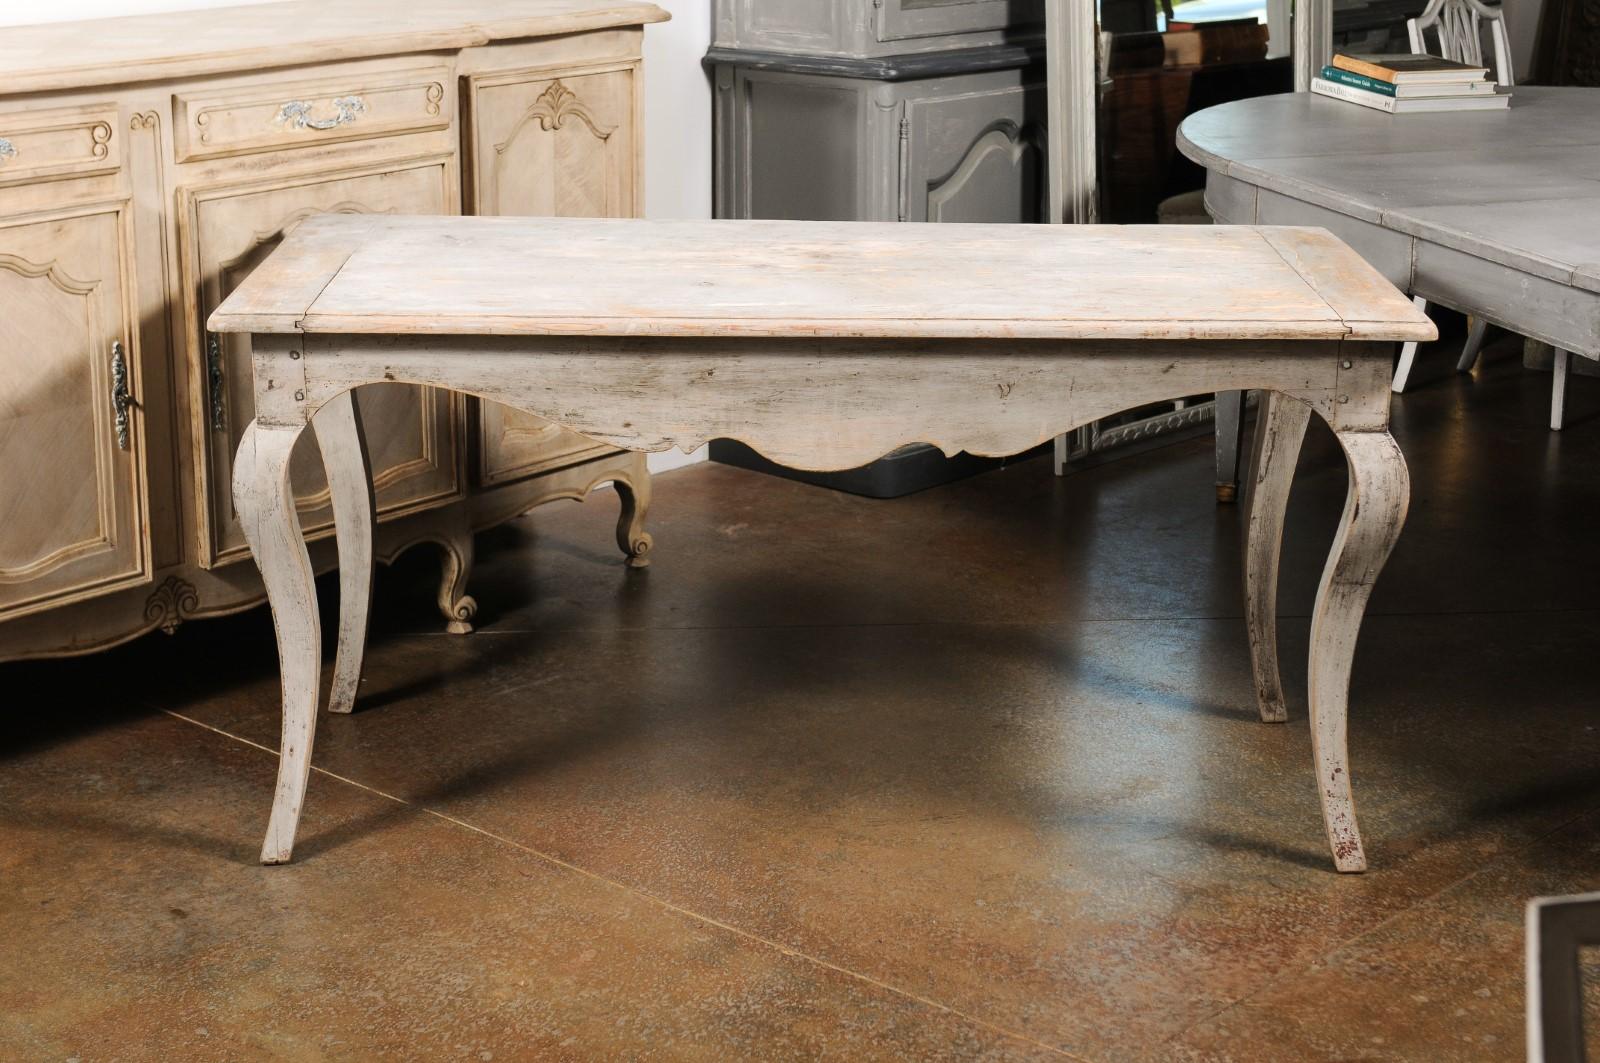 French 1730s Régence Painted Console Table with Carved Apron and Cabriole Legs For Sale 7